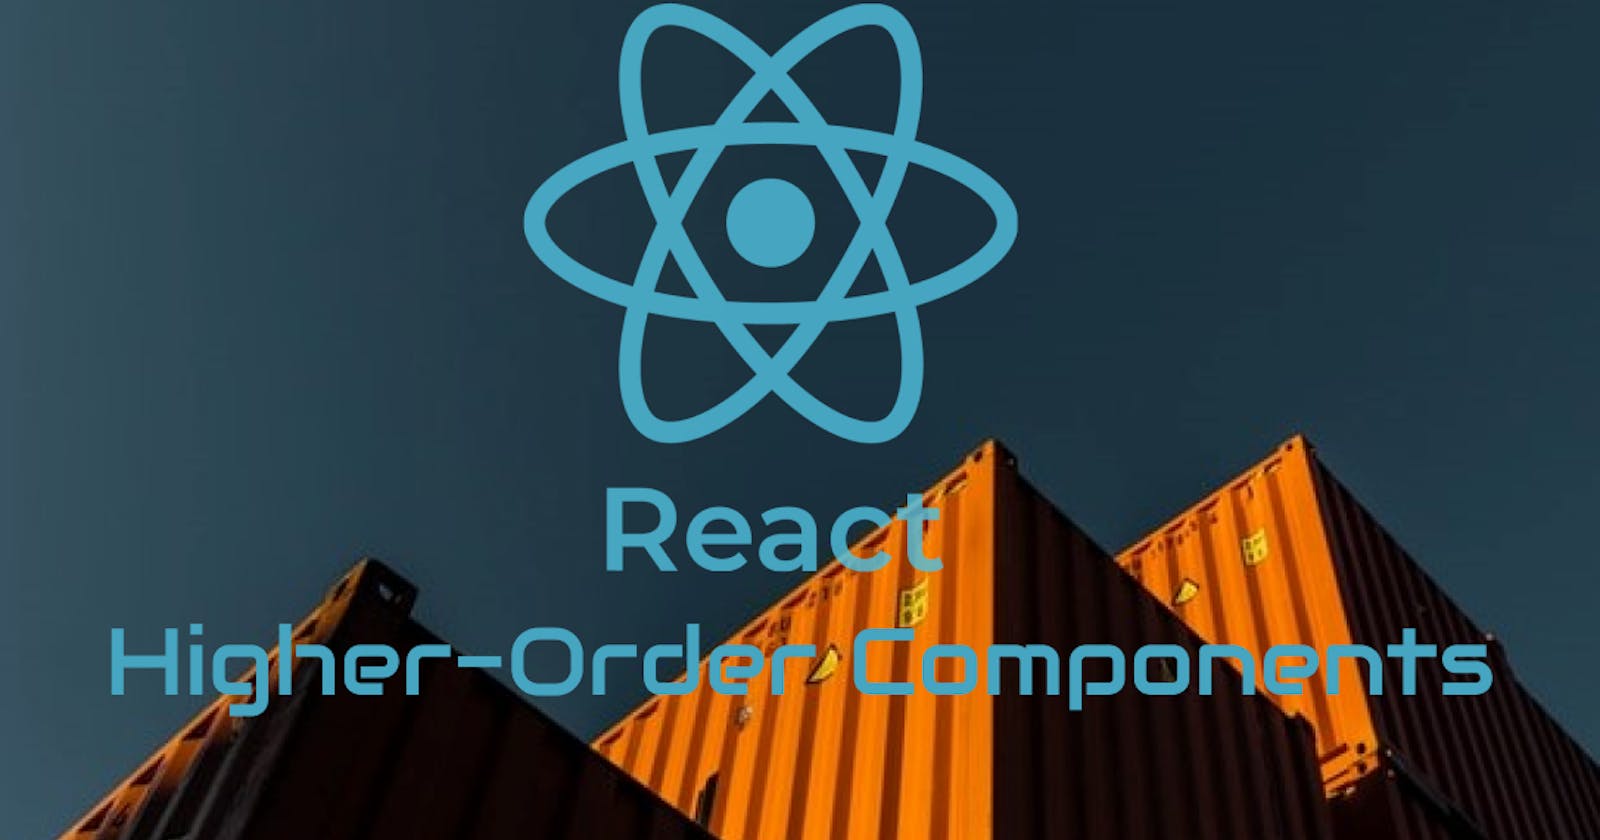 Using React Higher-Order Components (HOC) in your React apps